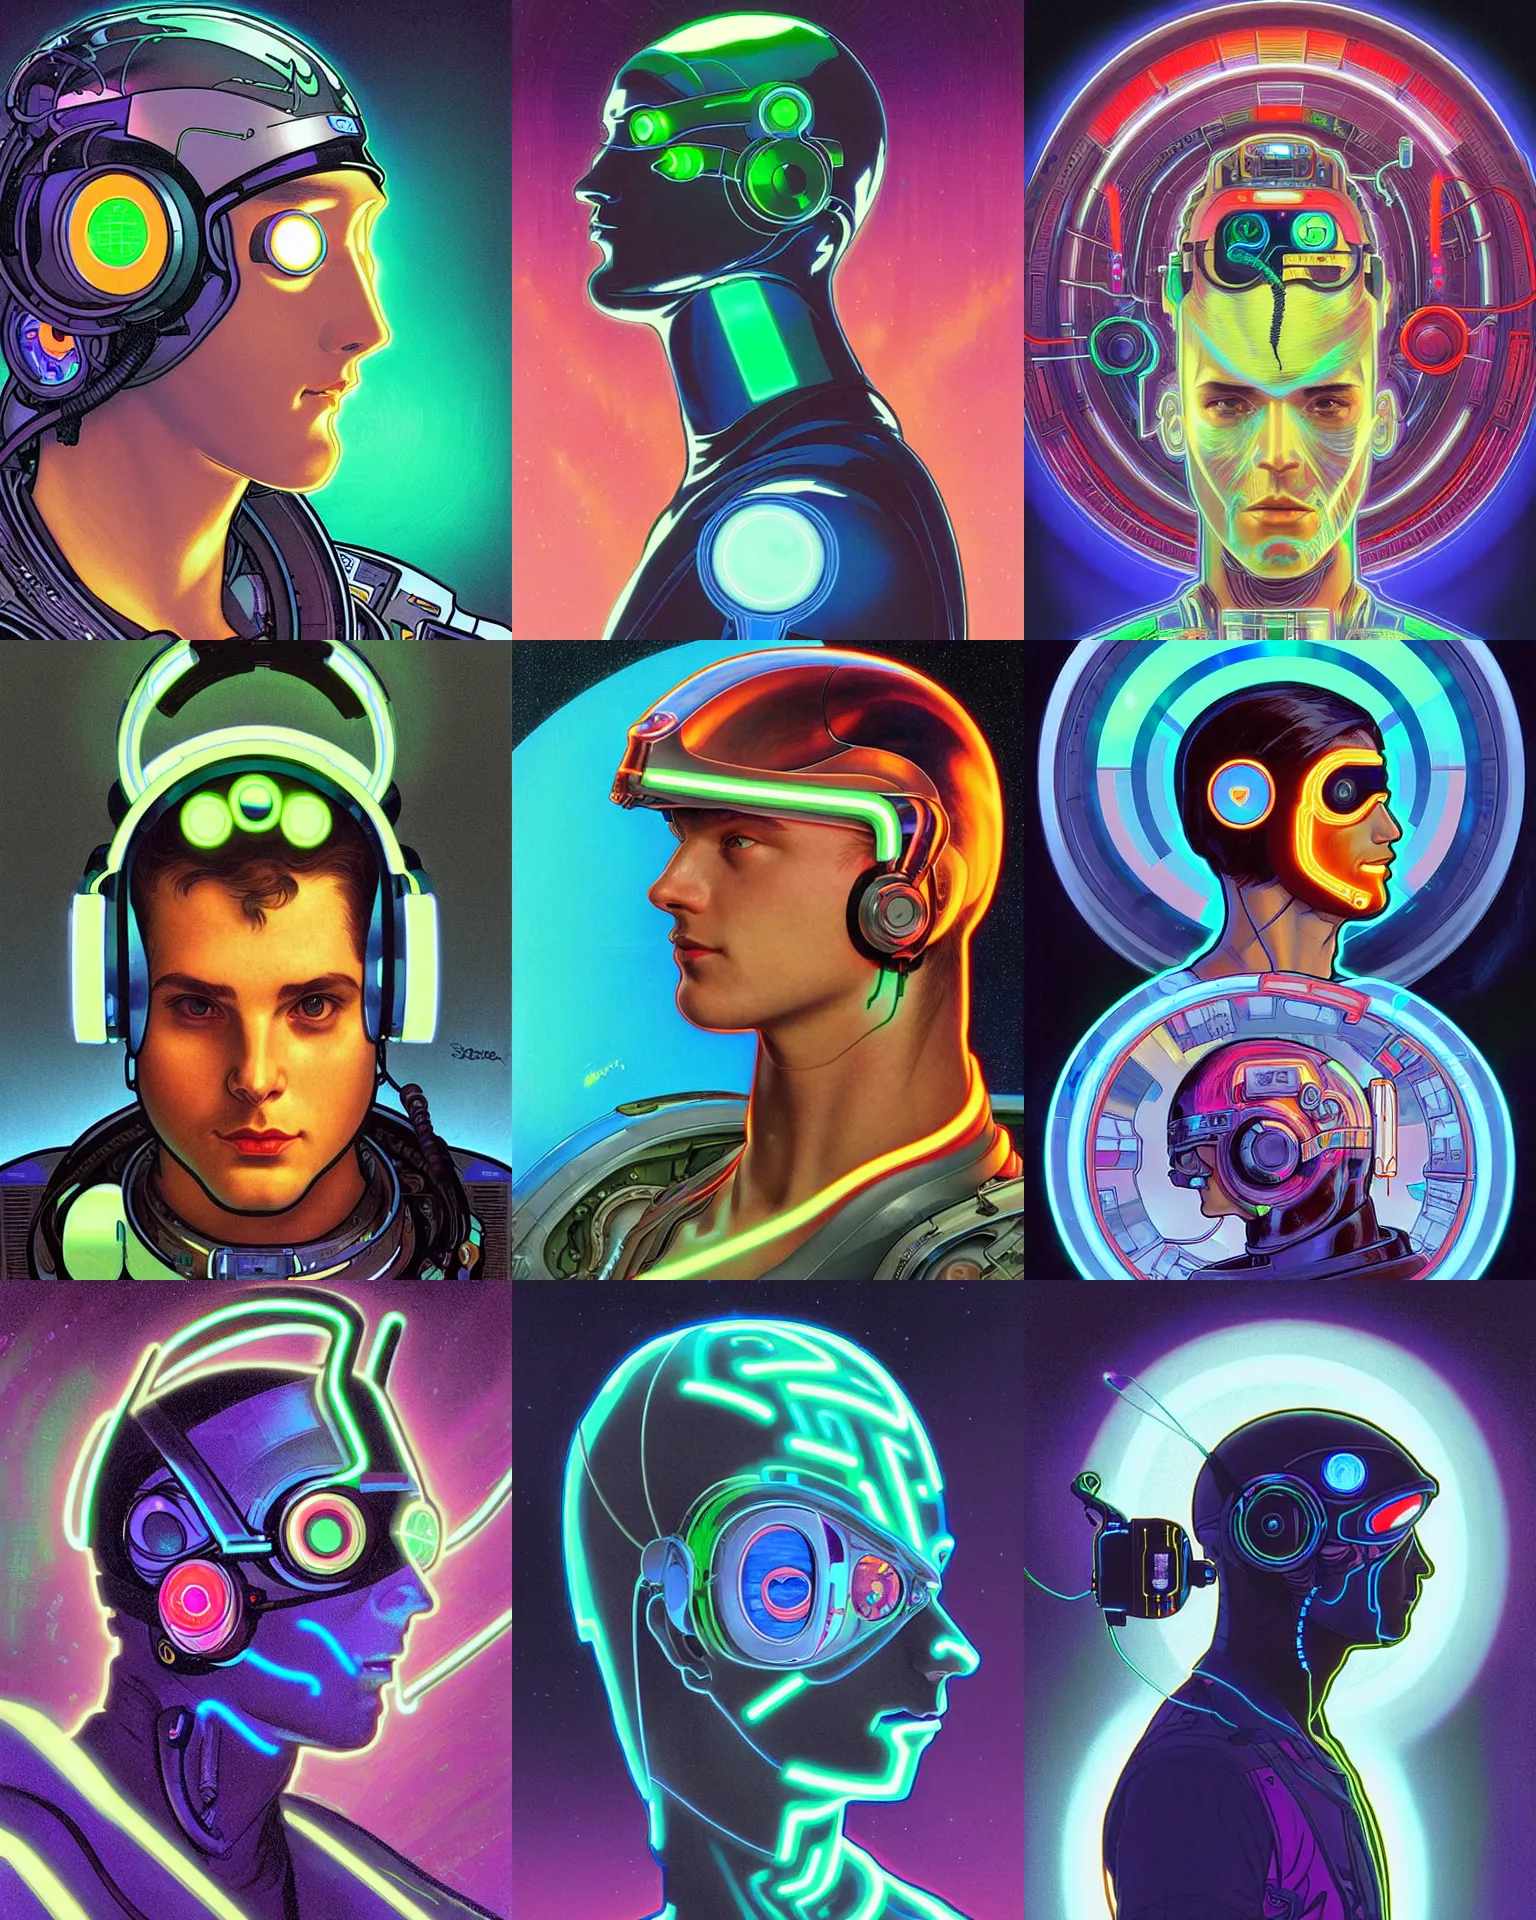 Prompt: sillouete side view future coder man, sleek cyclops display over eyes and glowing headset, neon accents, holographic colors, desaturated headshot portrait digital painting by ivan bilibin, alphonse mucha, donato giancola, john berkey, dean cornwall, alex grey, tom whalen, astronaut cyberpunk electric lights profile